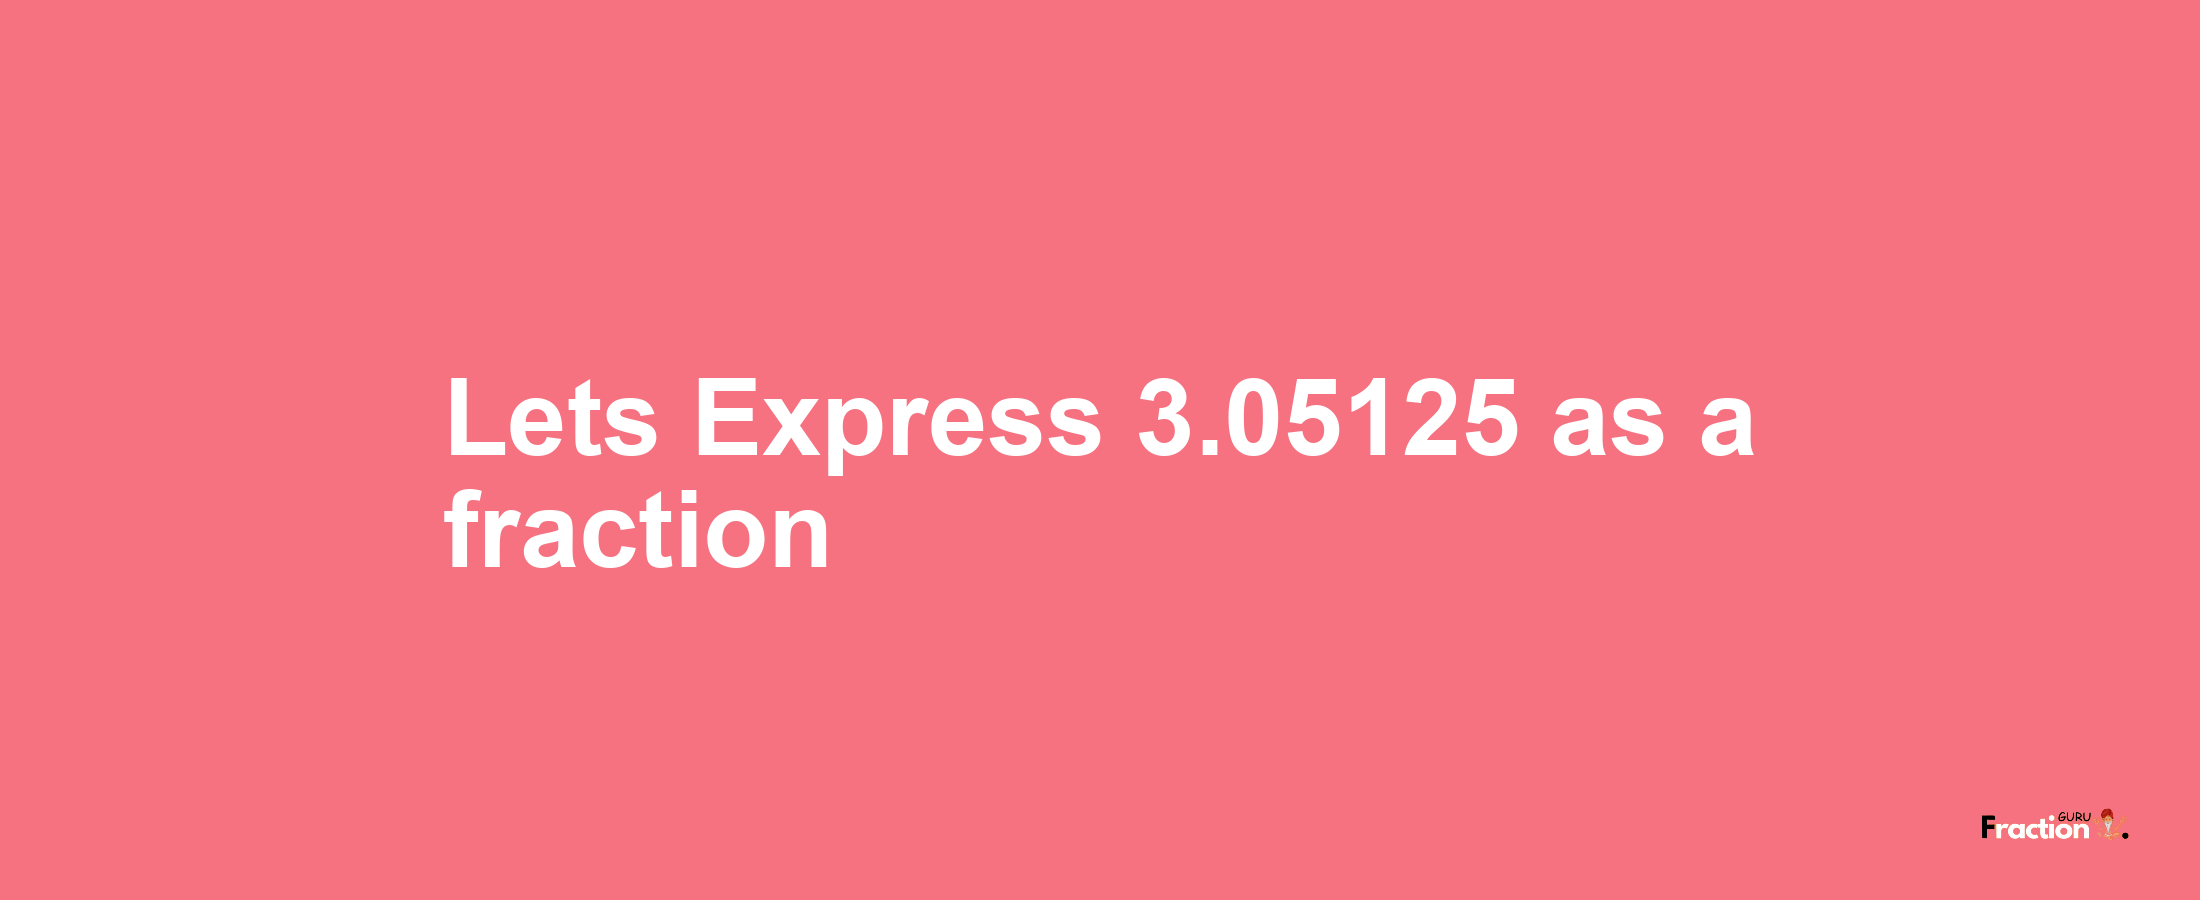 Lets Express 3.05125 as afraction